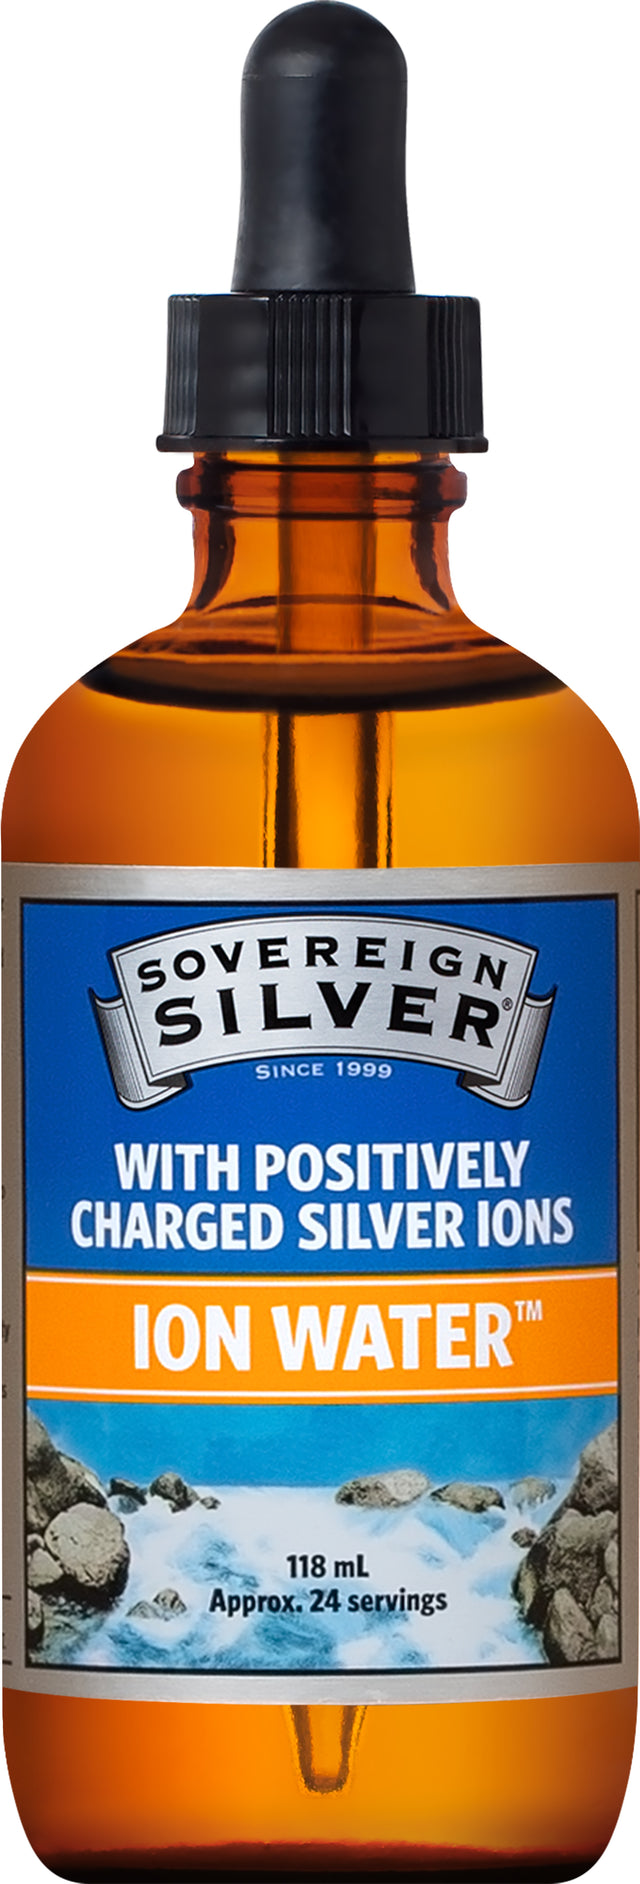 Sovereign Silver Ion Water Dropper Top, 118ml